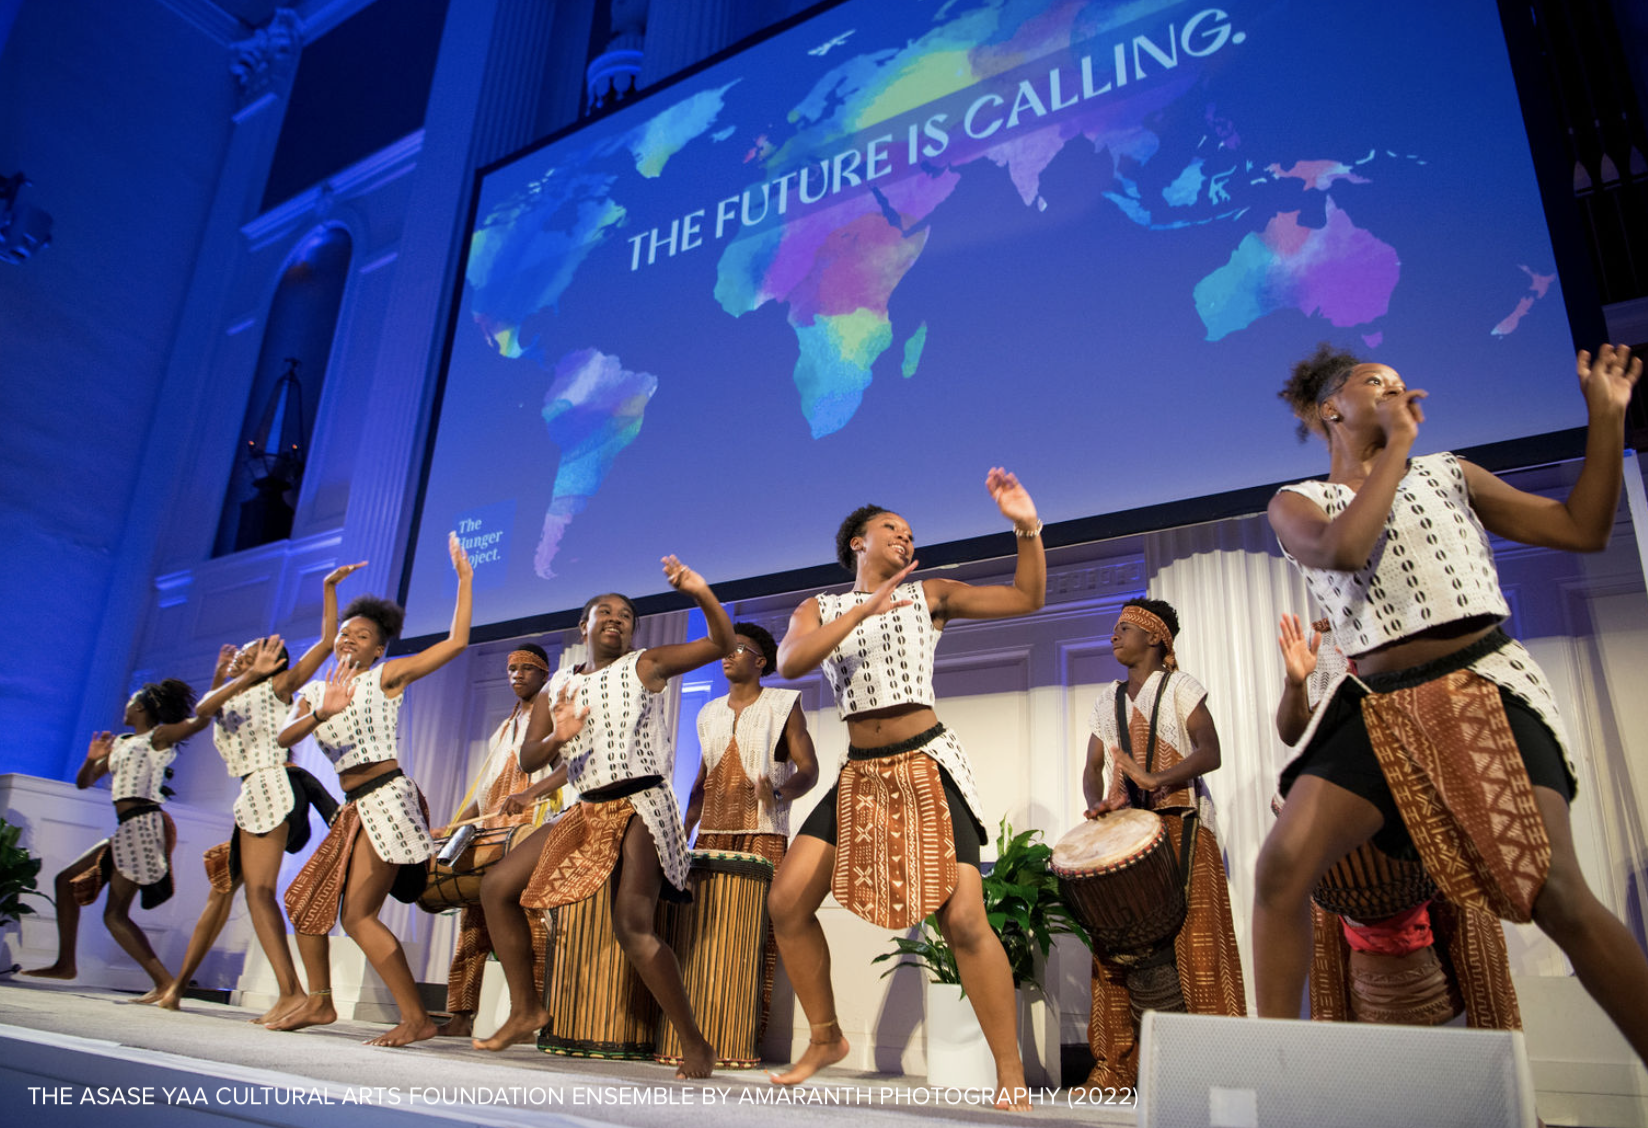 The Asase Yaa Cultural Arts Ensemble performing at The Hunger Project's 2022 Fall Event Speakers. Photo by AMARANTH PHOTOGRAPHY